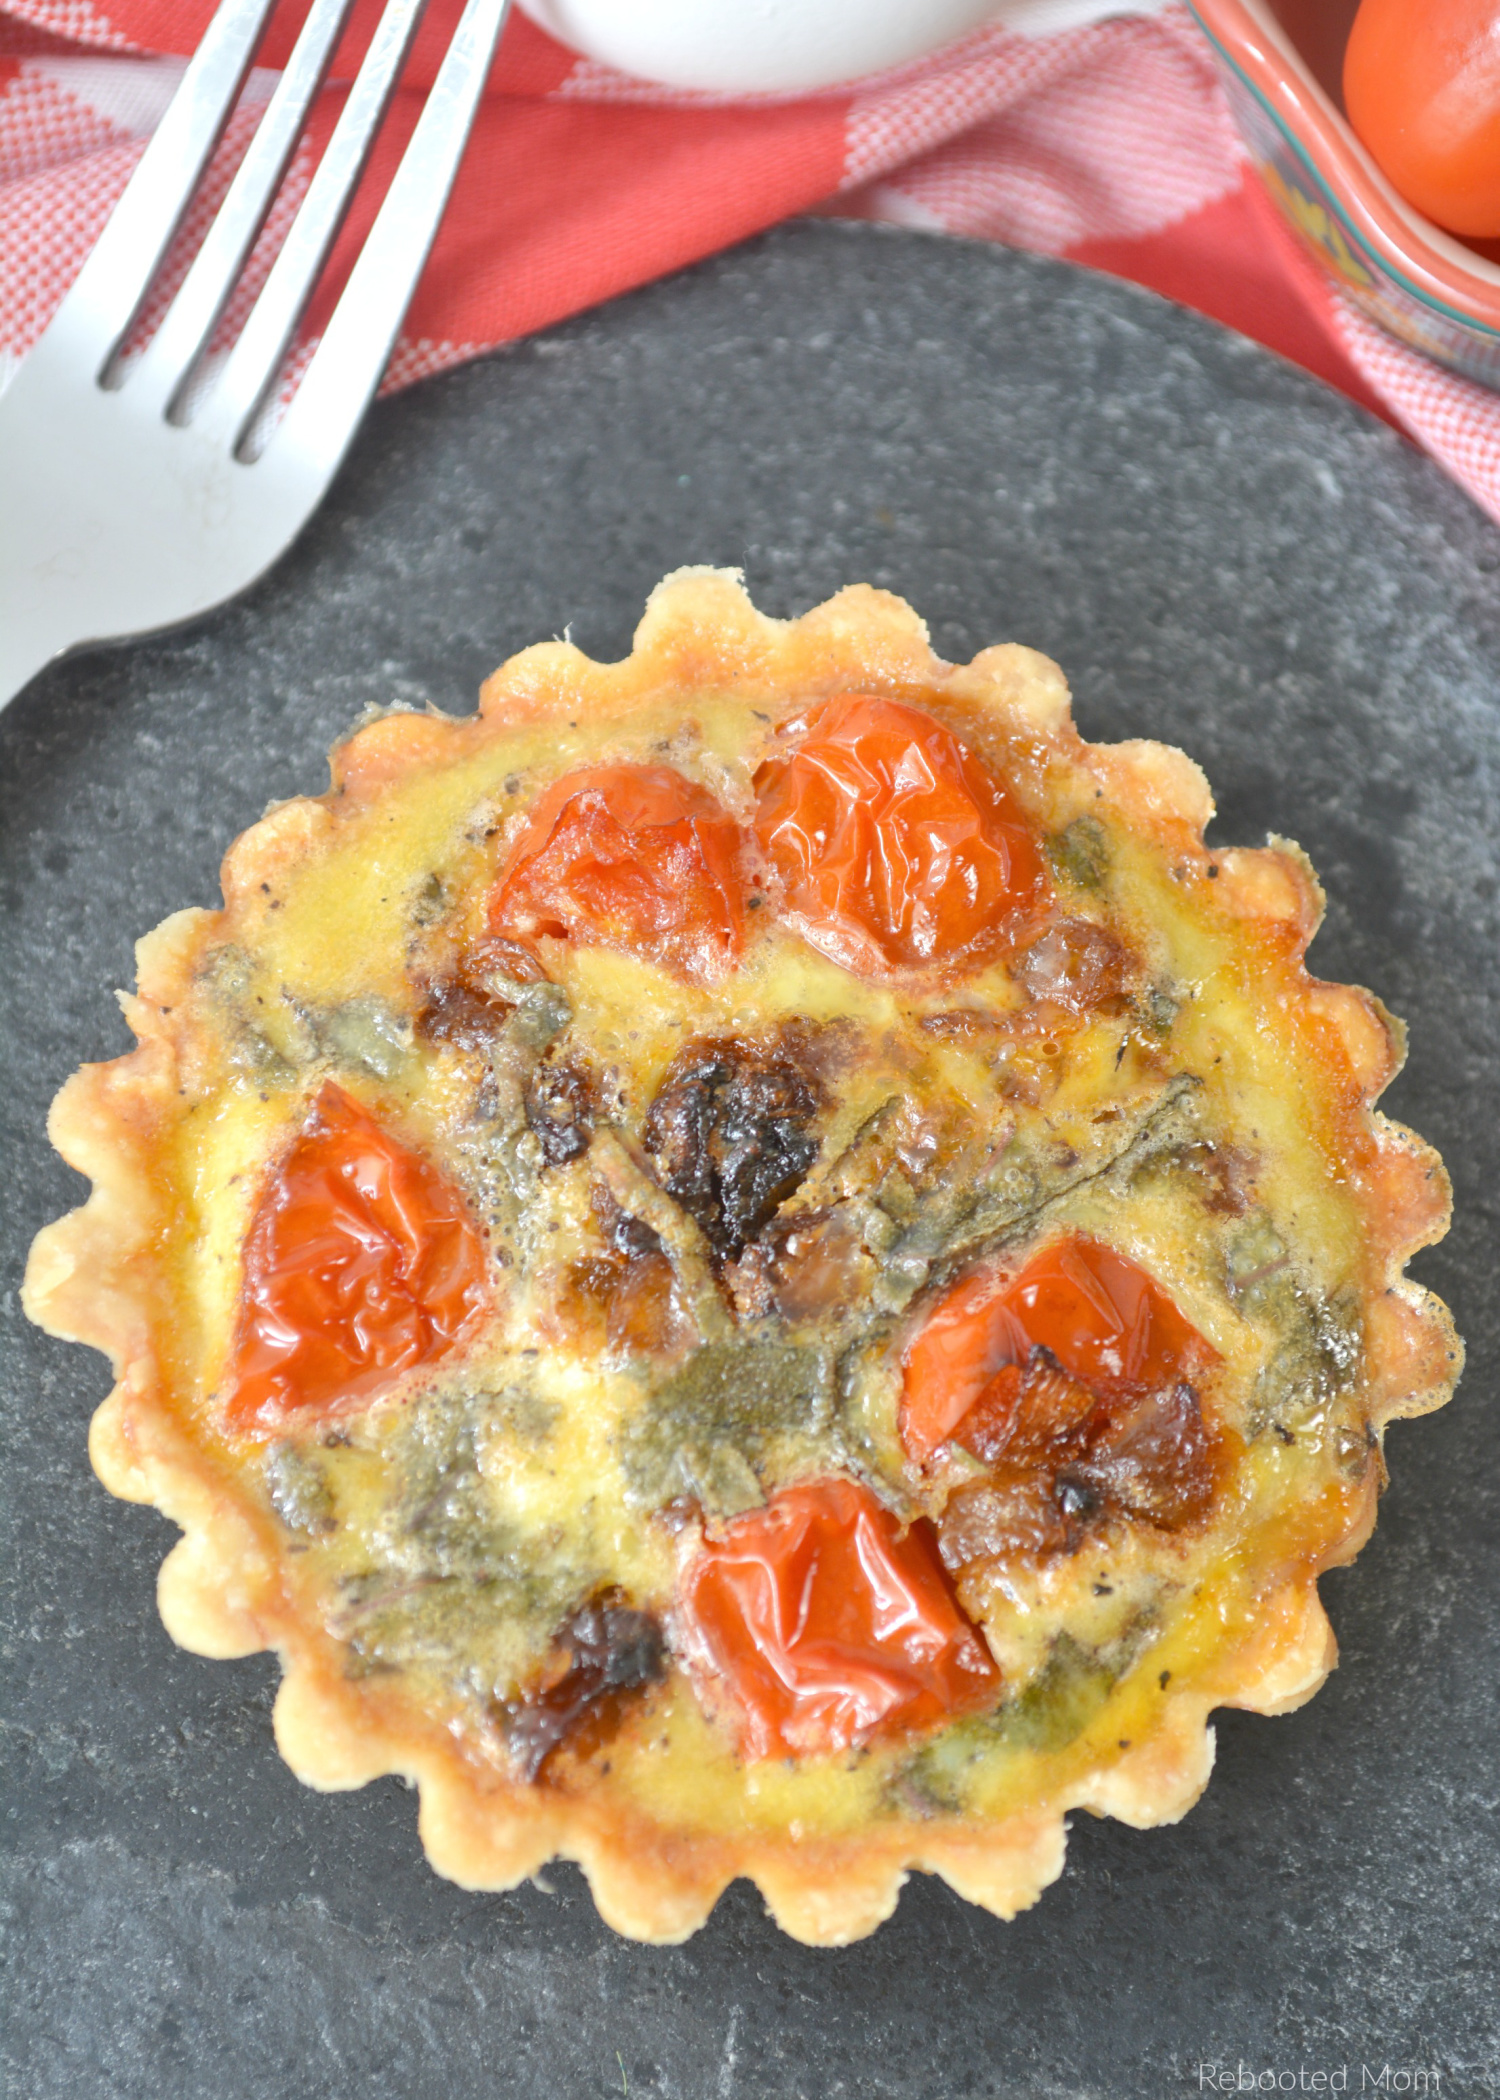  Goat Cheese & Tomato Tart // Easy and healthy Goat Cheese & Tomato Tart - whipped together easily with simple ingredients in a ready made pie crust. Perfect for a light summer dinner!